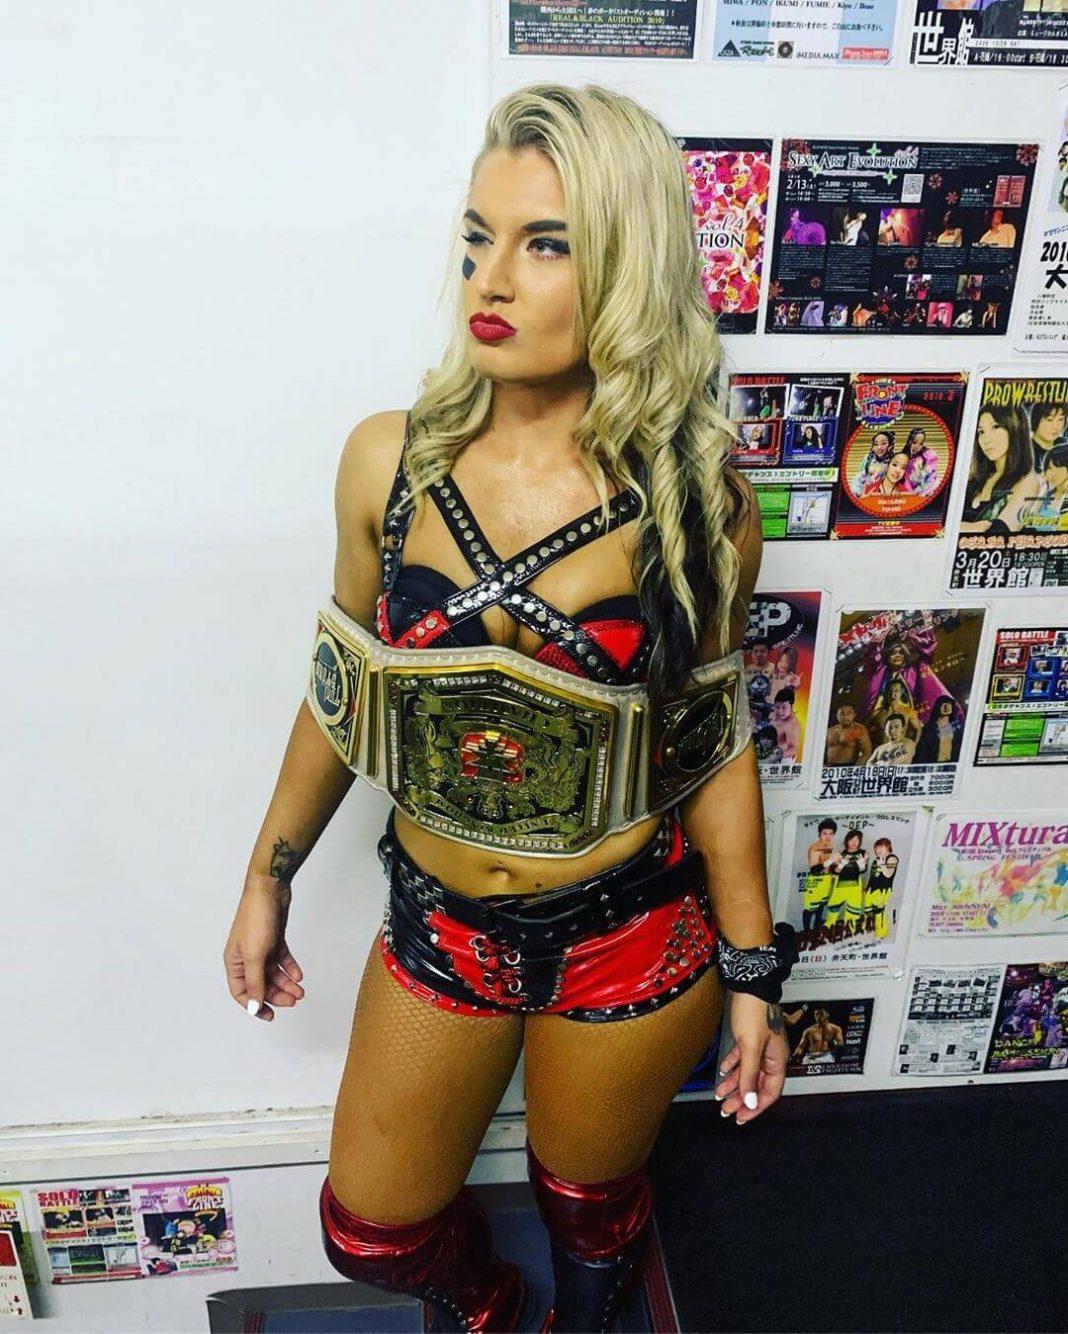 51 Toni Storm Nude pictures Which Demonstrate She Is The Hottest Lady On Ea...